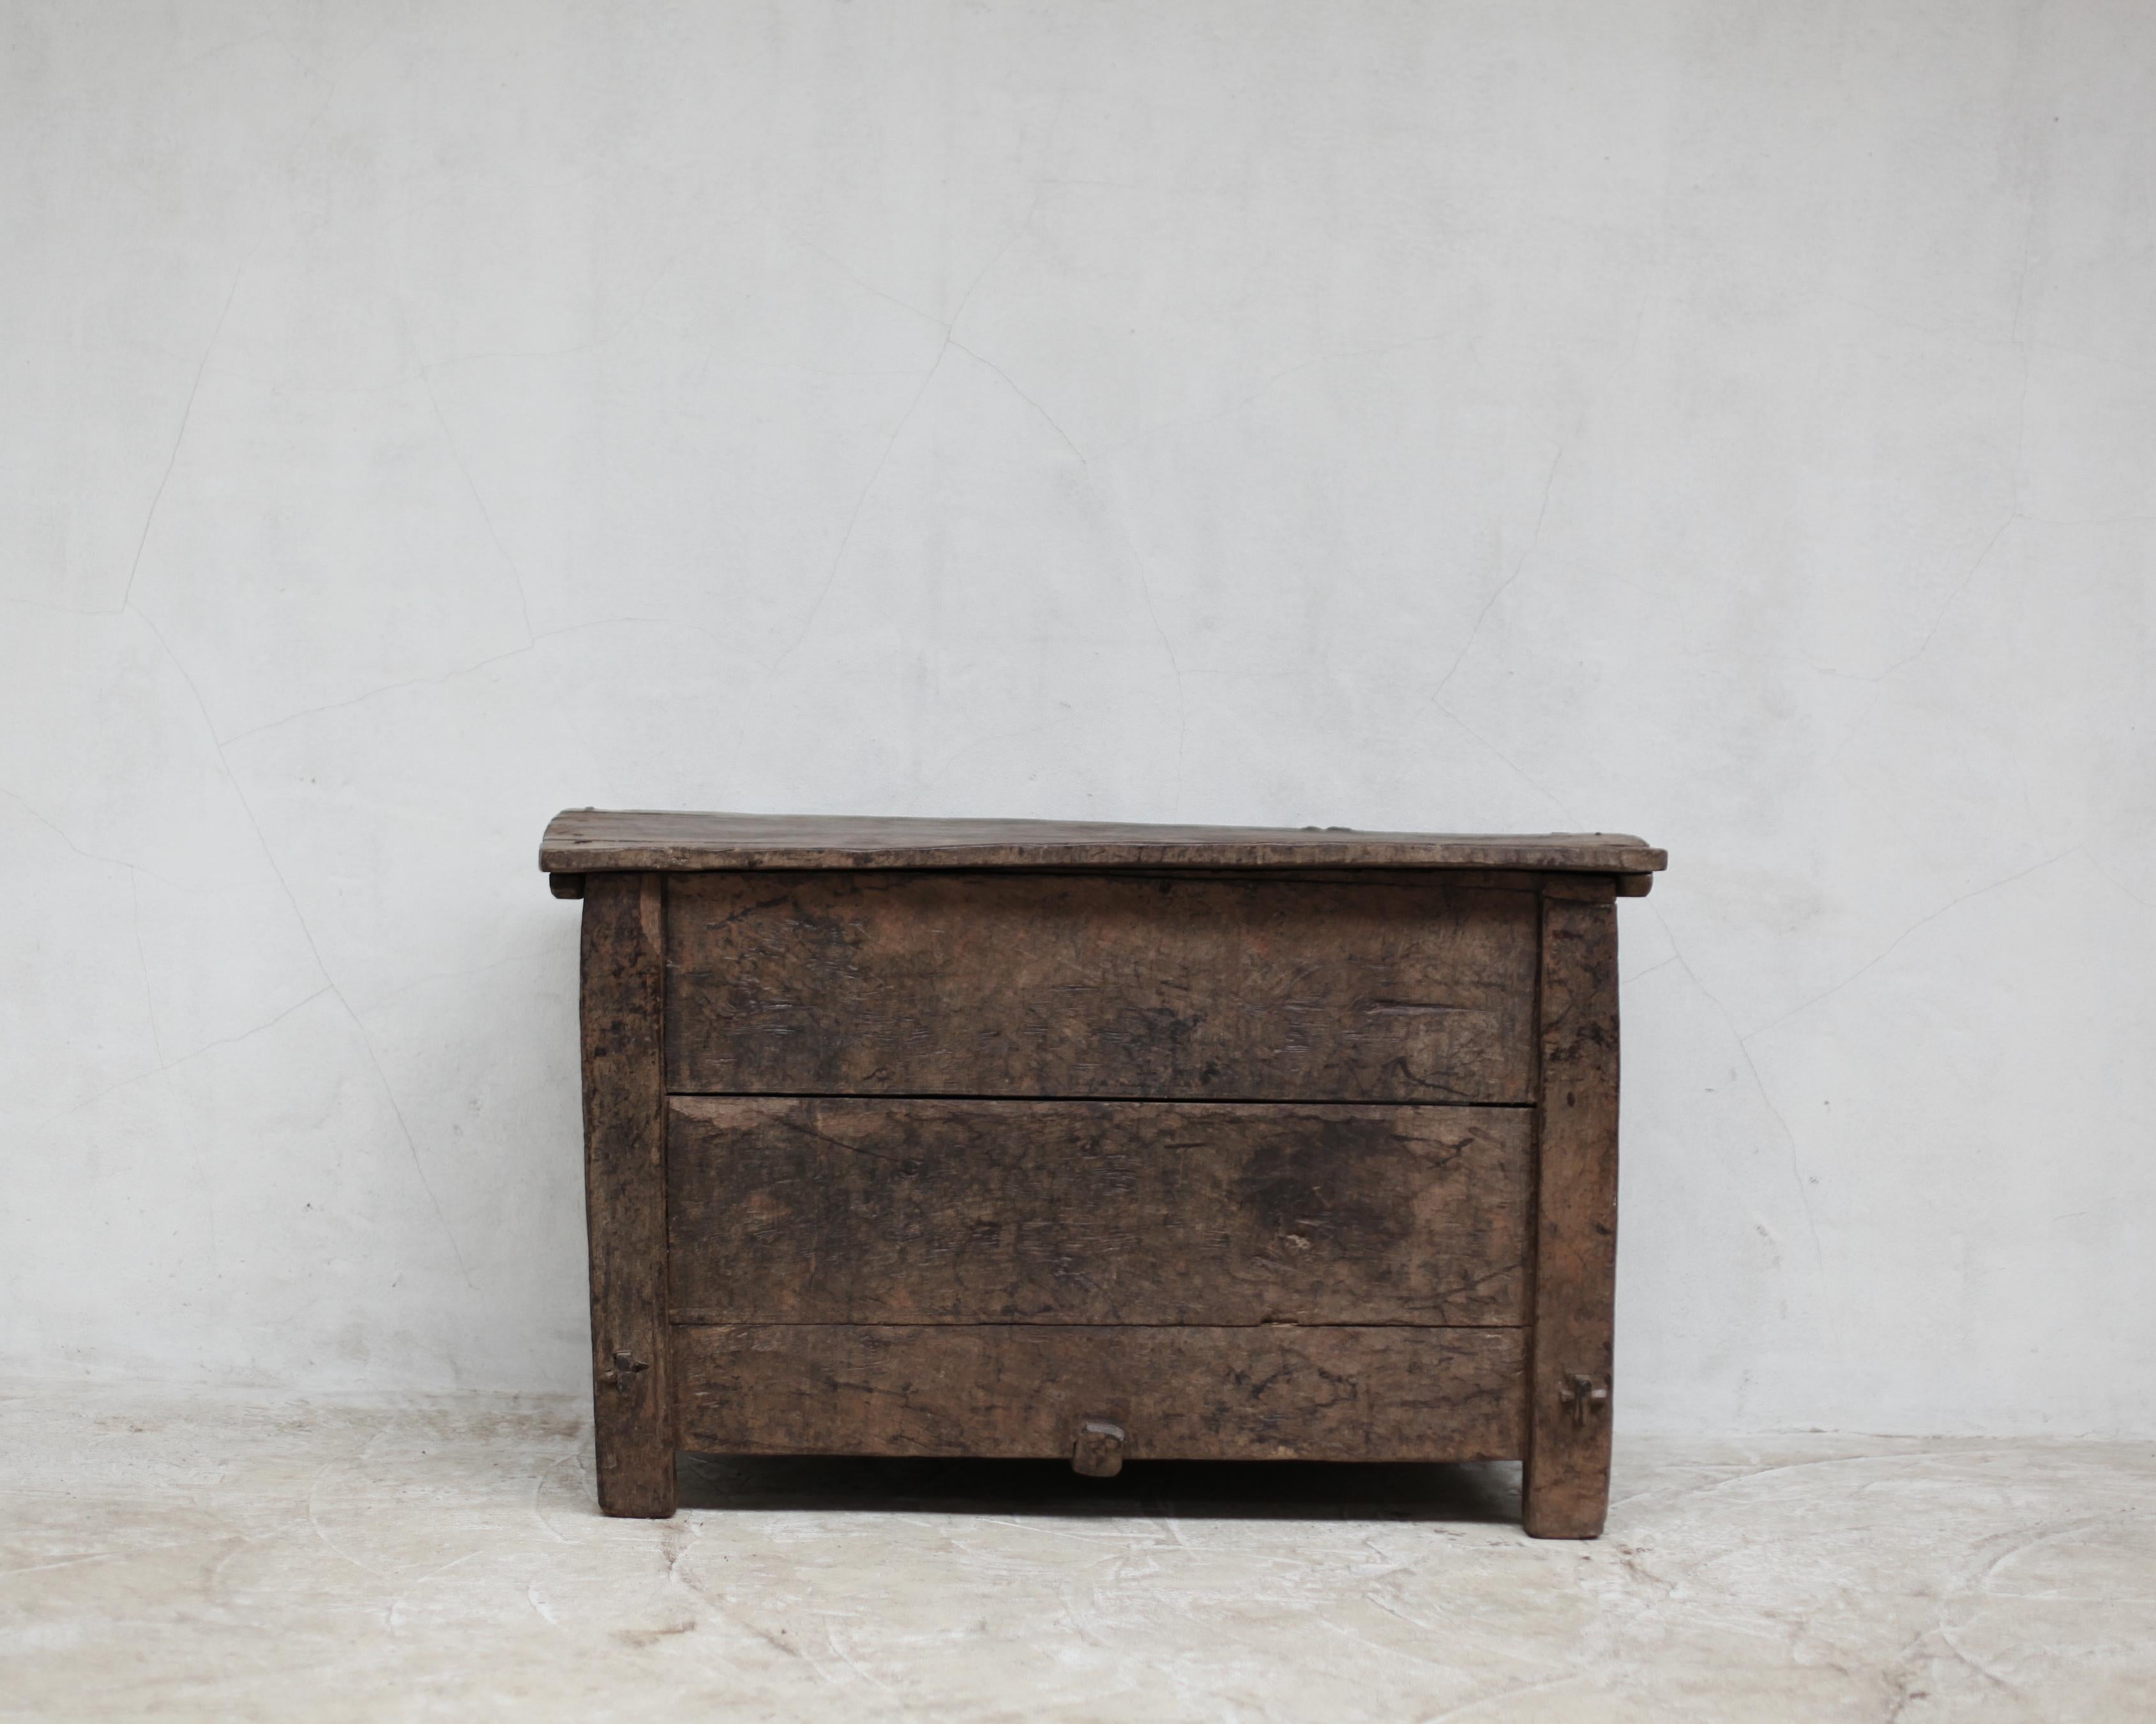 A very large Galician hewn chestnut coffer from the 17th century.

Beautiful patination developed through hundreds of years of use.

Perfect as a console and/or storage.

-

We offer free shipping to the USA/Canada through Fedex with this item.